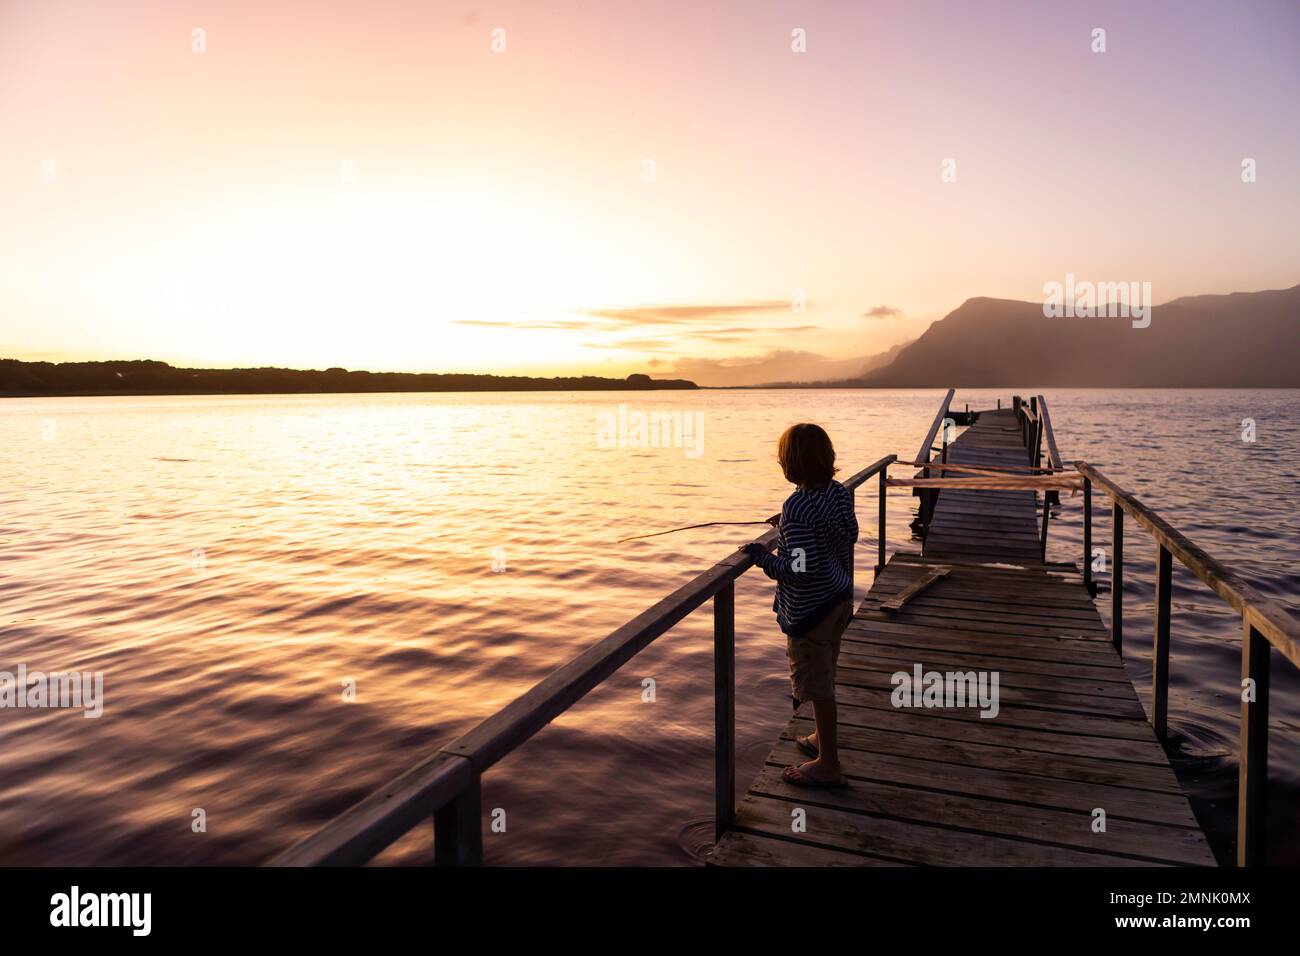 South Africa, Stanford, Boy (10-11) standing on pier at lagoon at sunset Stock Photo